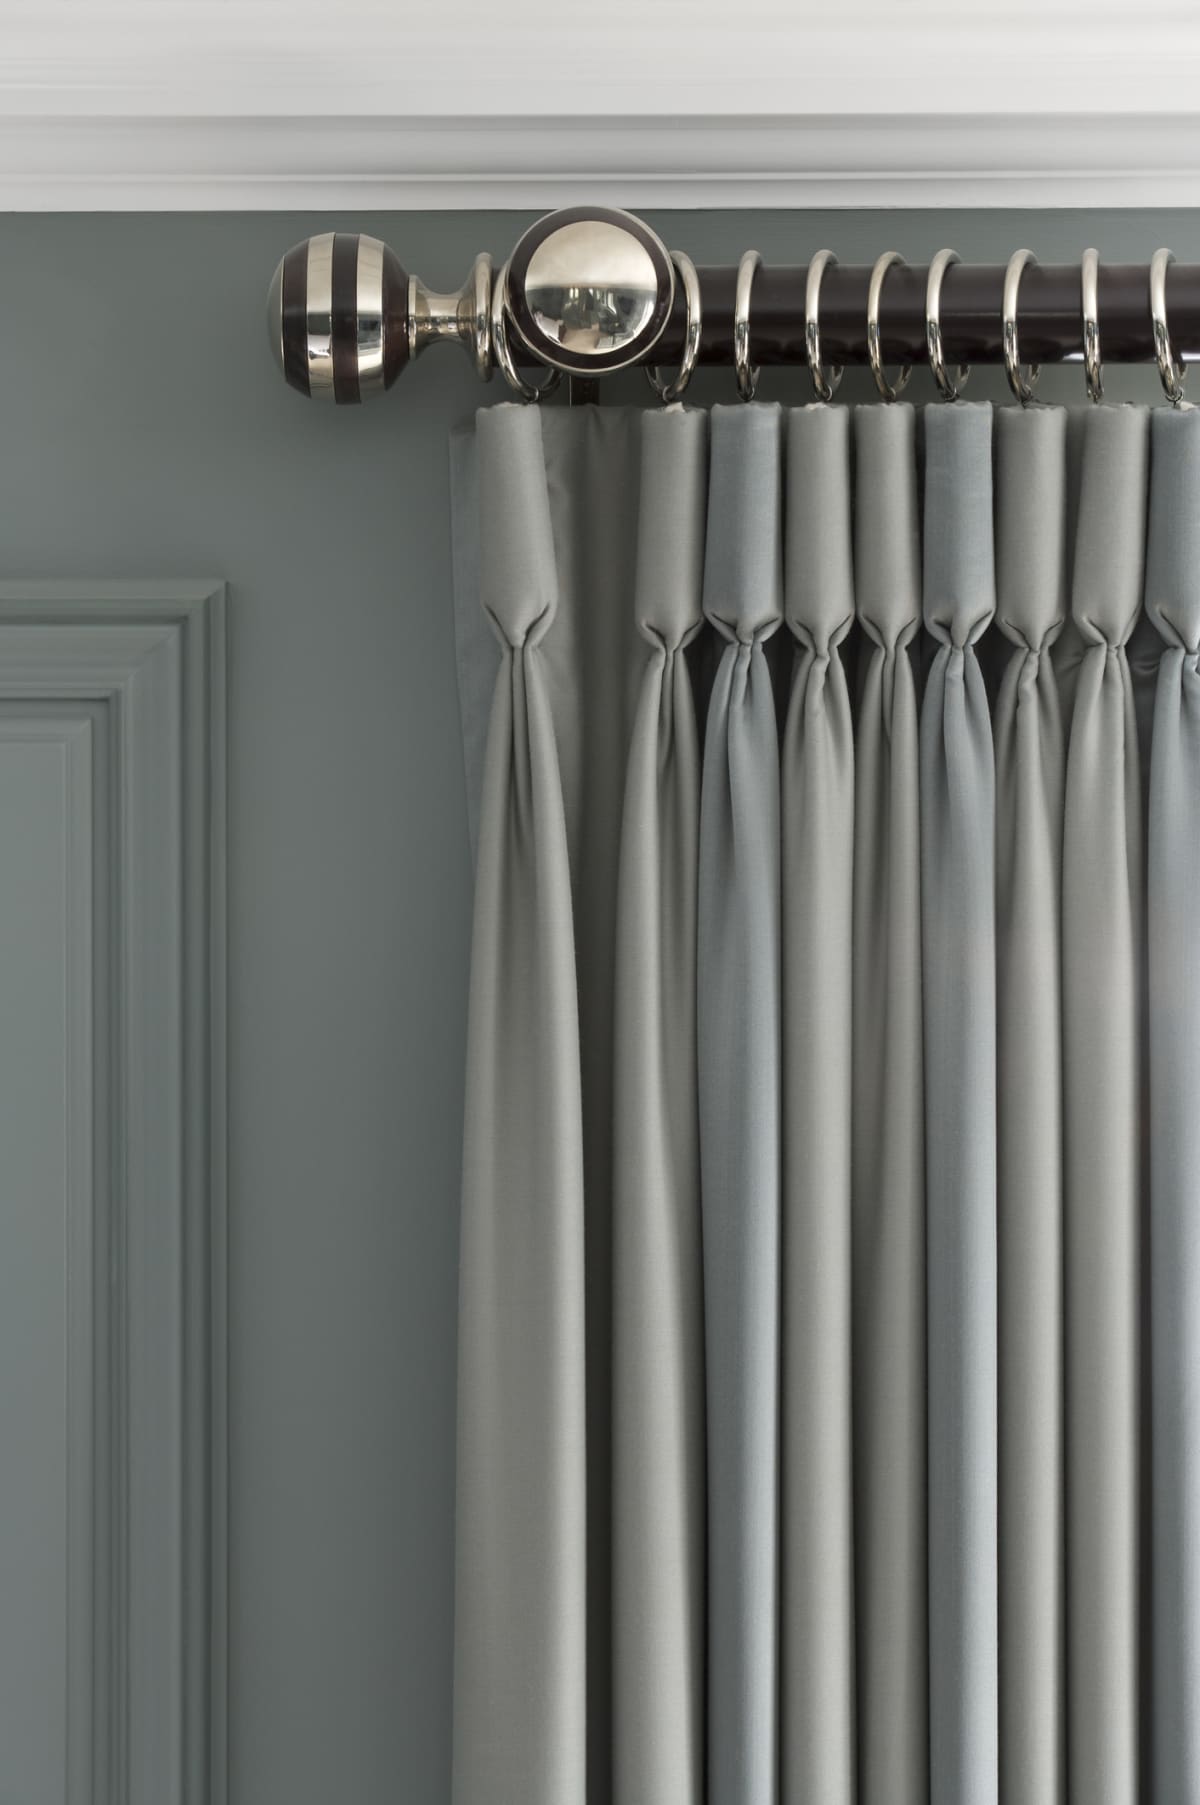 Grey pinch pleated curtains hanging from a wood and metal curtain rail with metal rings.